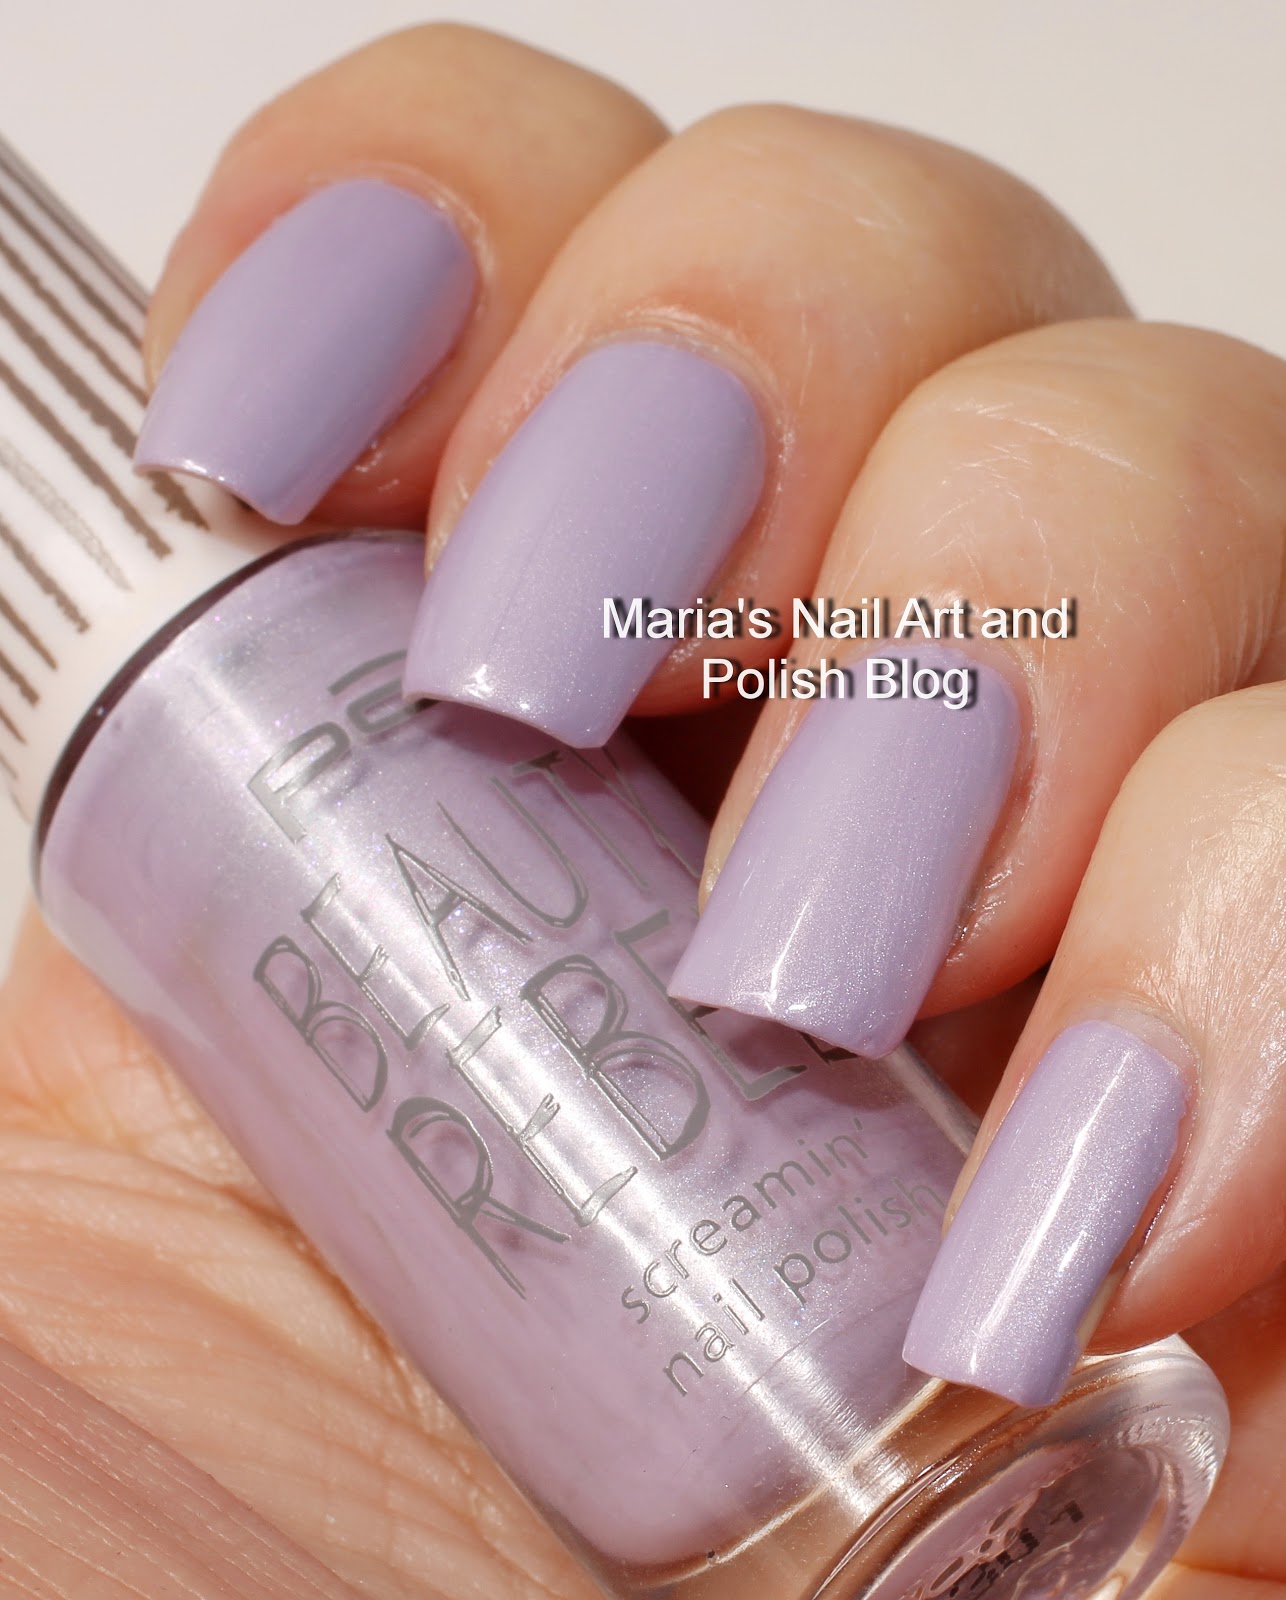 Marias Nail Art and Polish Blog: Swatch spam: Jessica, Astor, Yes Love ...